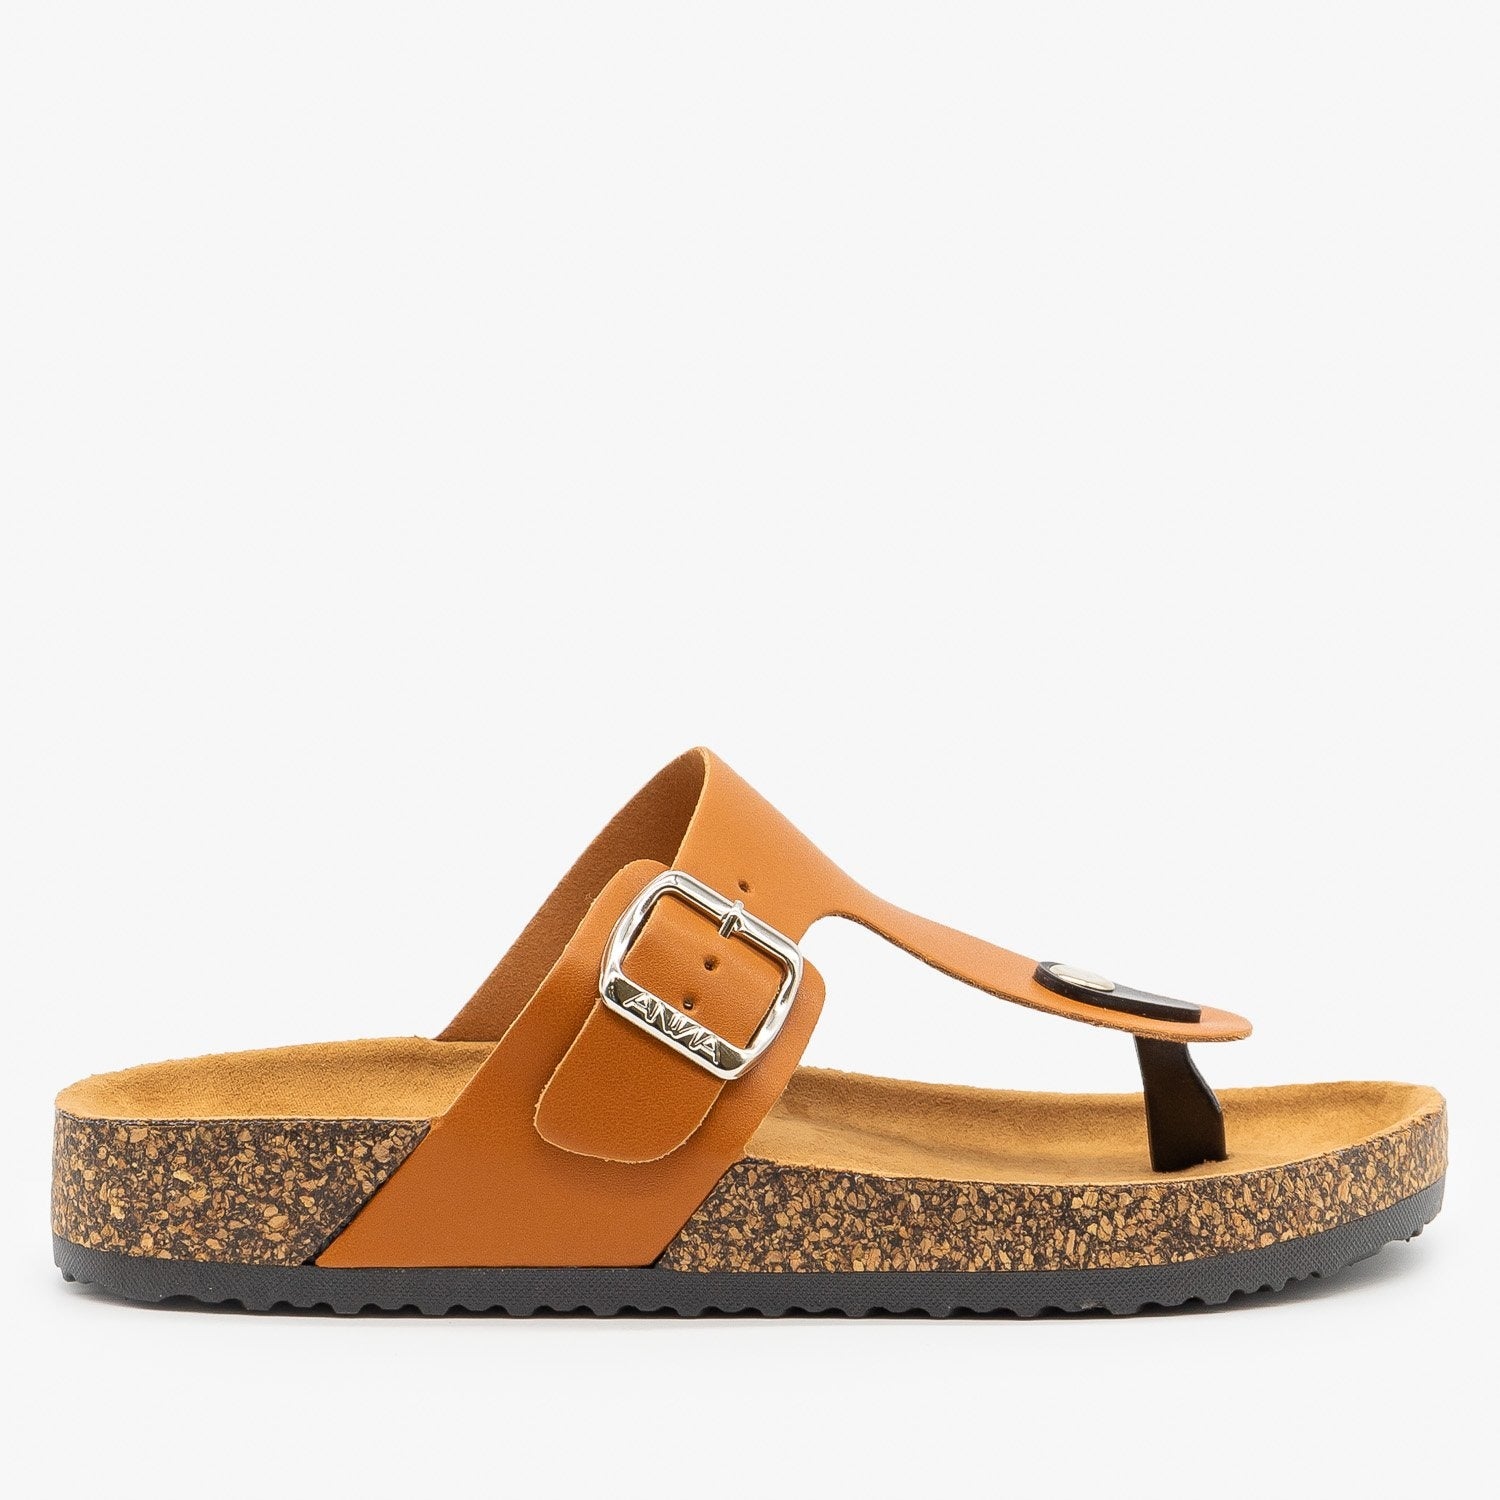 Buckled Cork Sandals - Anna Shoes Glory 